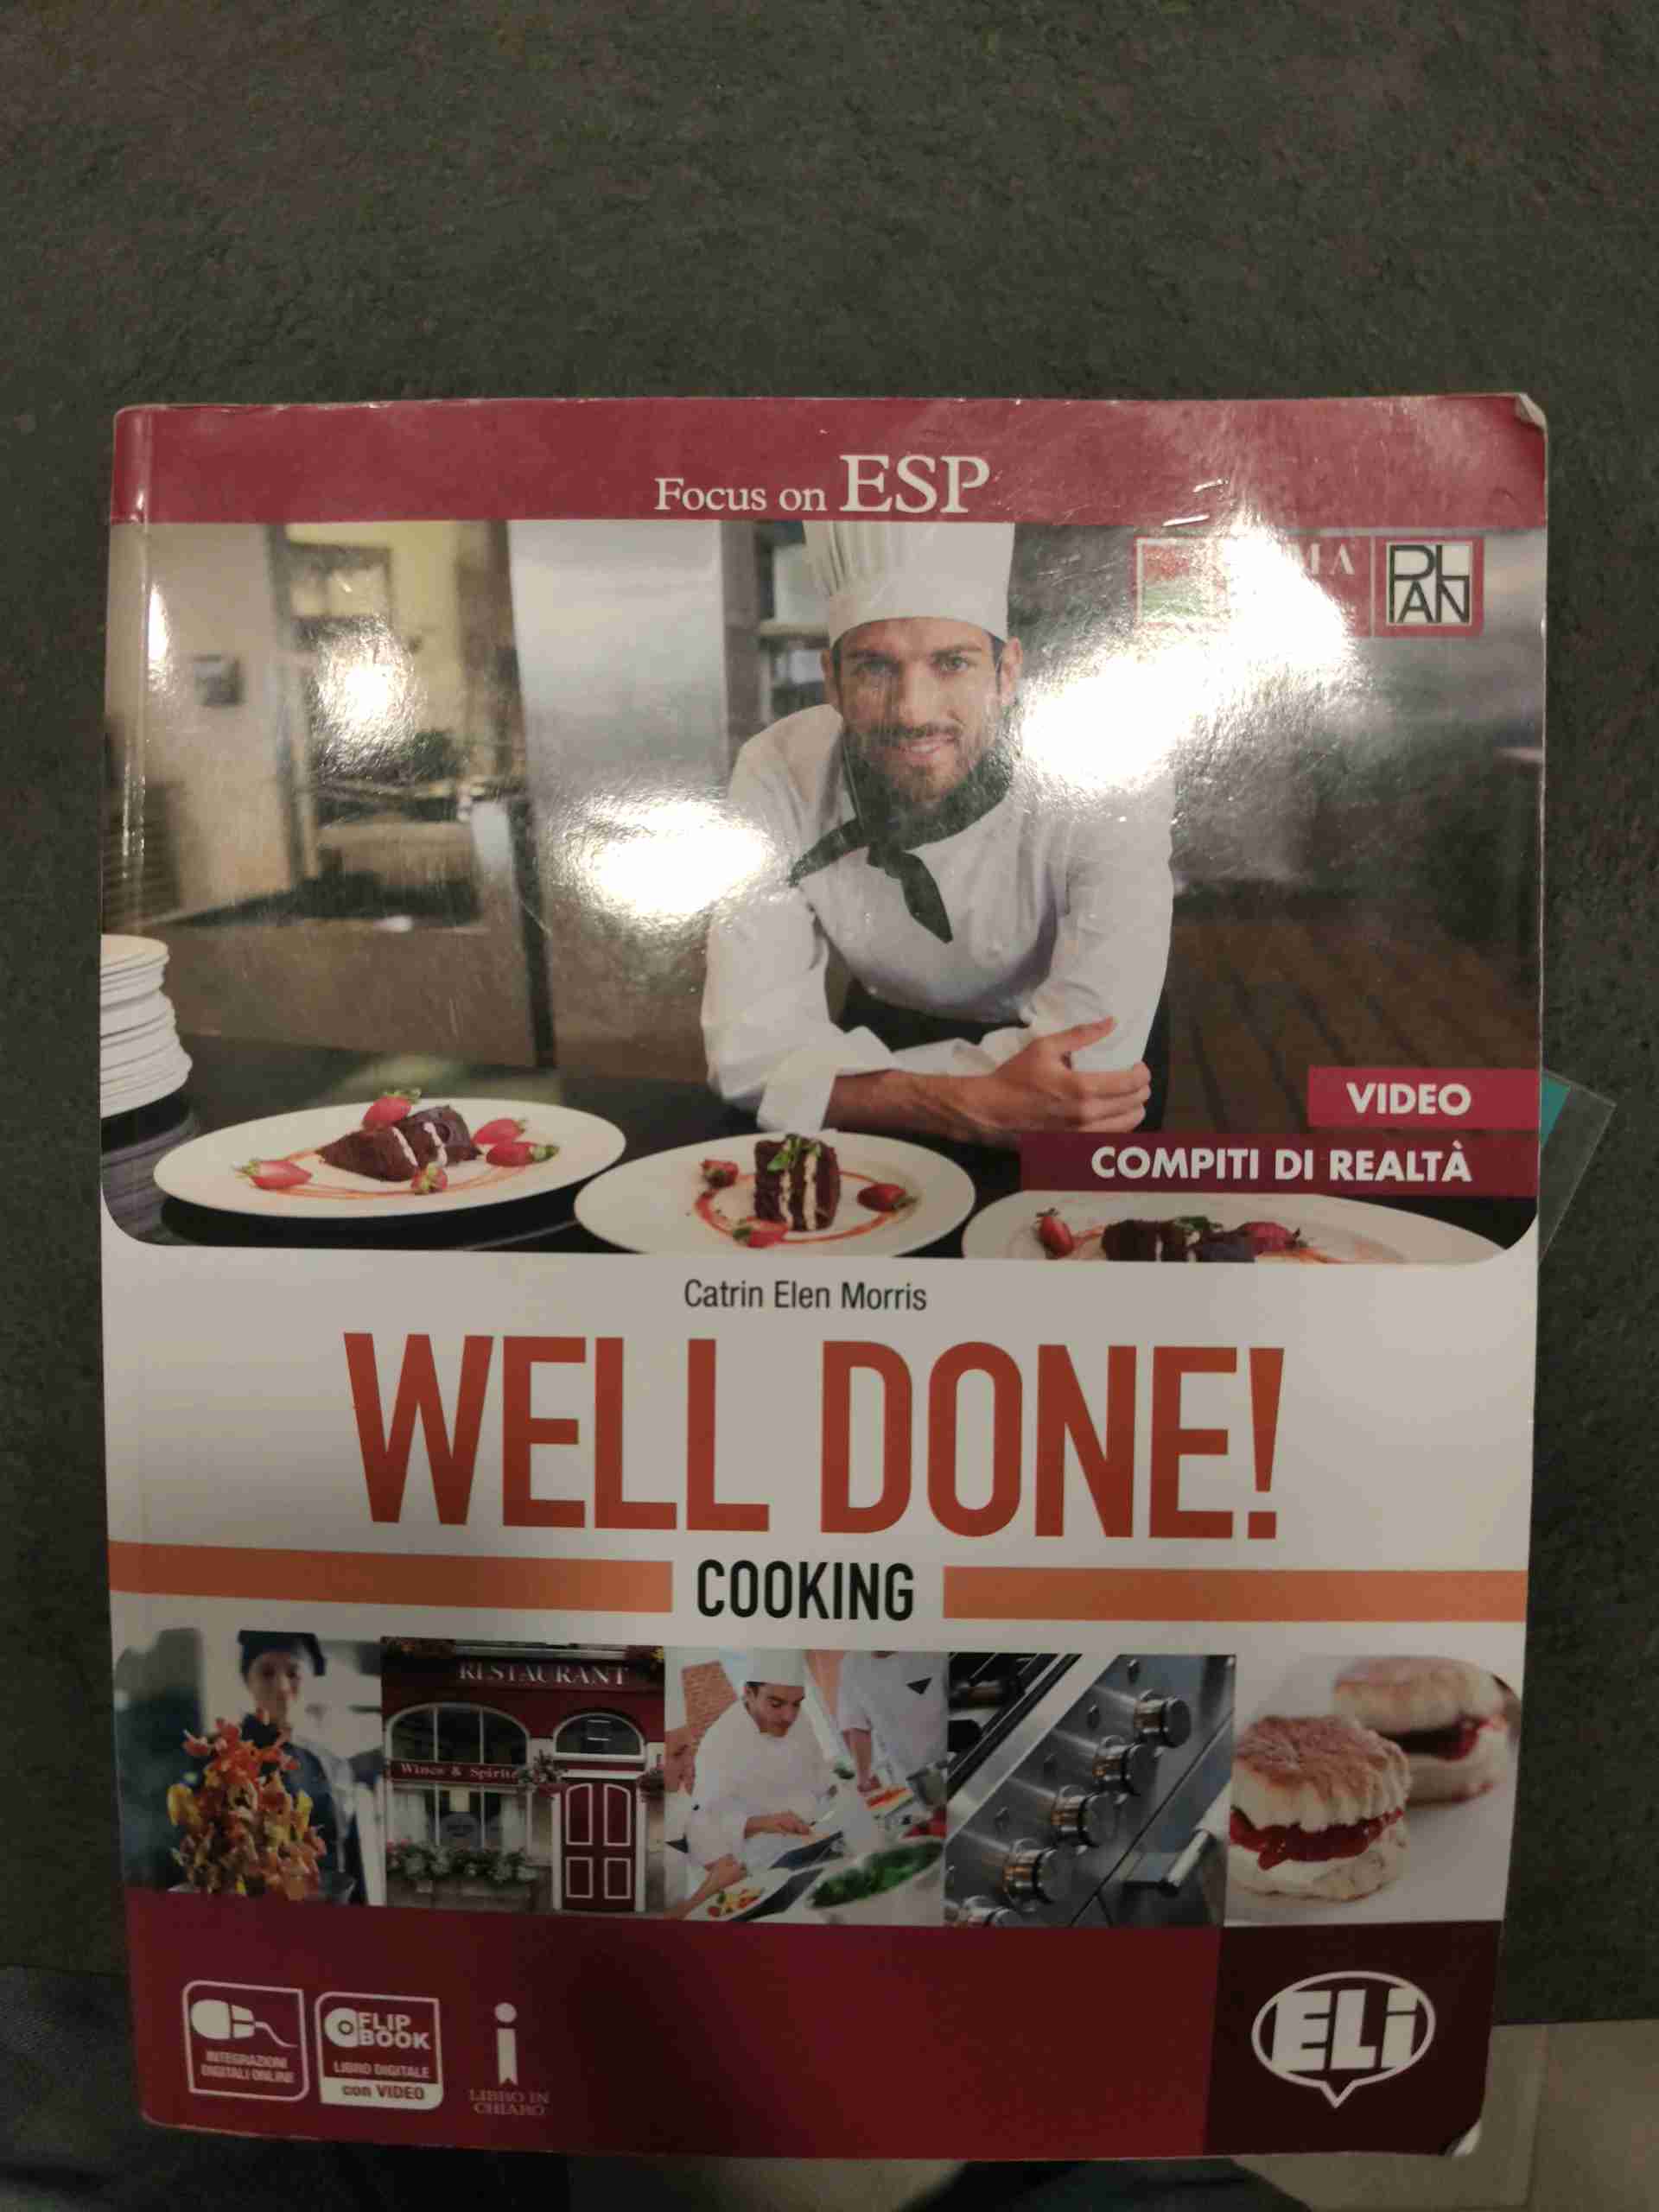 Well done! - Cooking